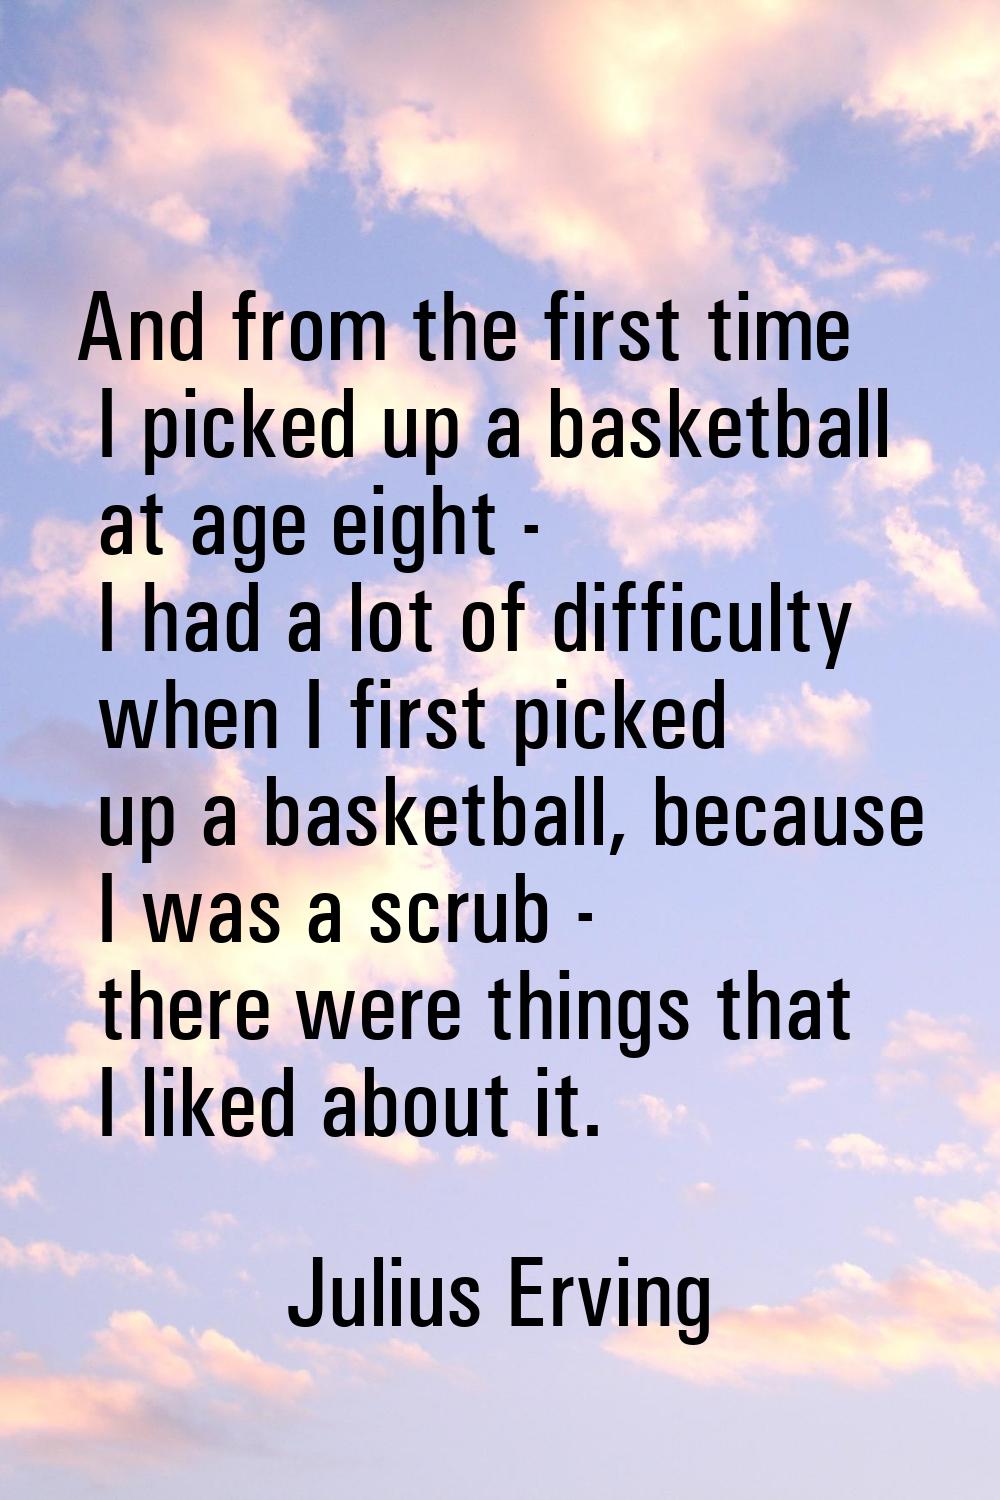 And from the first time I picked up a basketball at age eight - I had a lot of difficulty when I fi